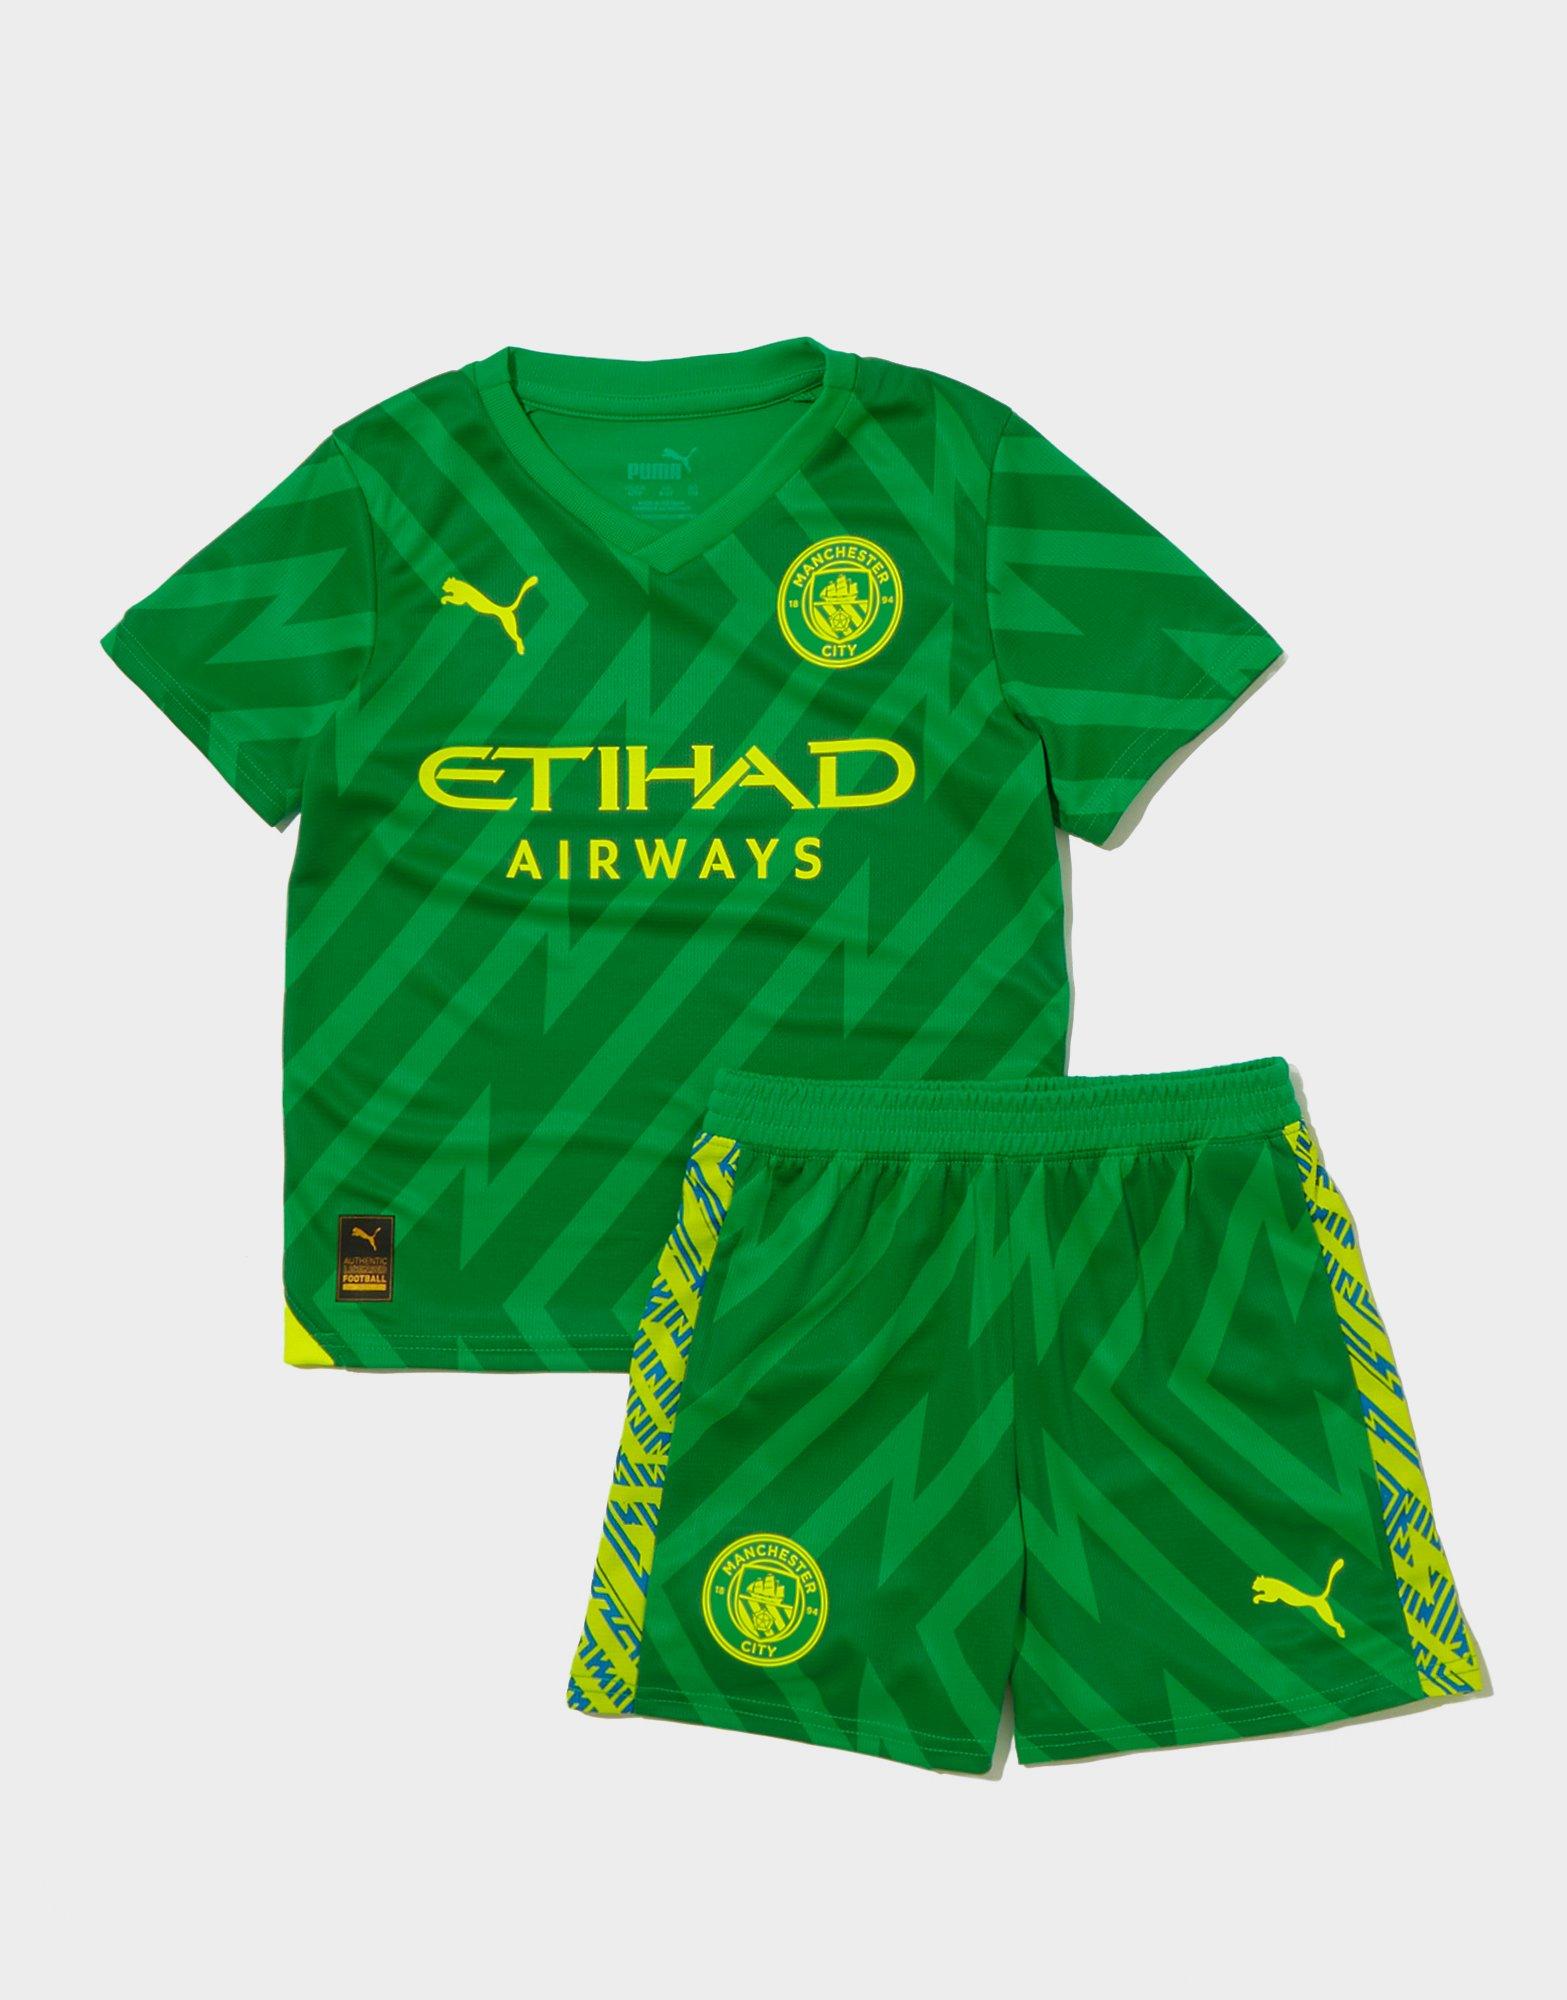 Manchester City faces legal action from Superdry over training kit